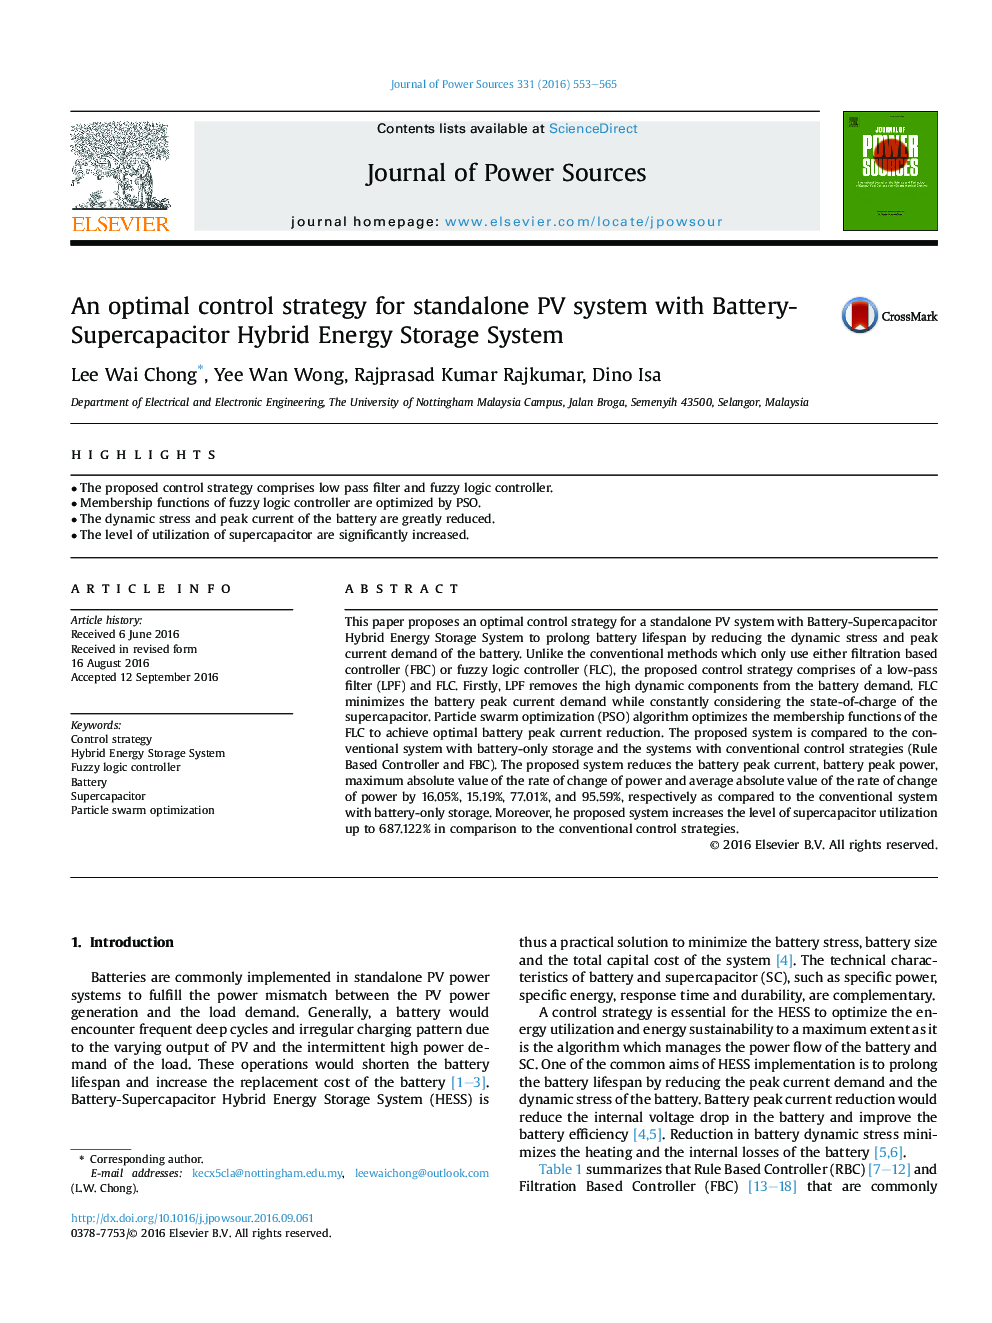 An optimal control strategy for standalone PV system with Battery-Supercapacitor Hybrid Energy Storage System